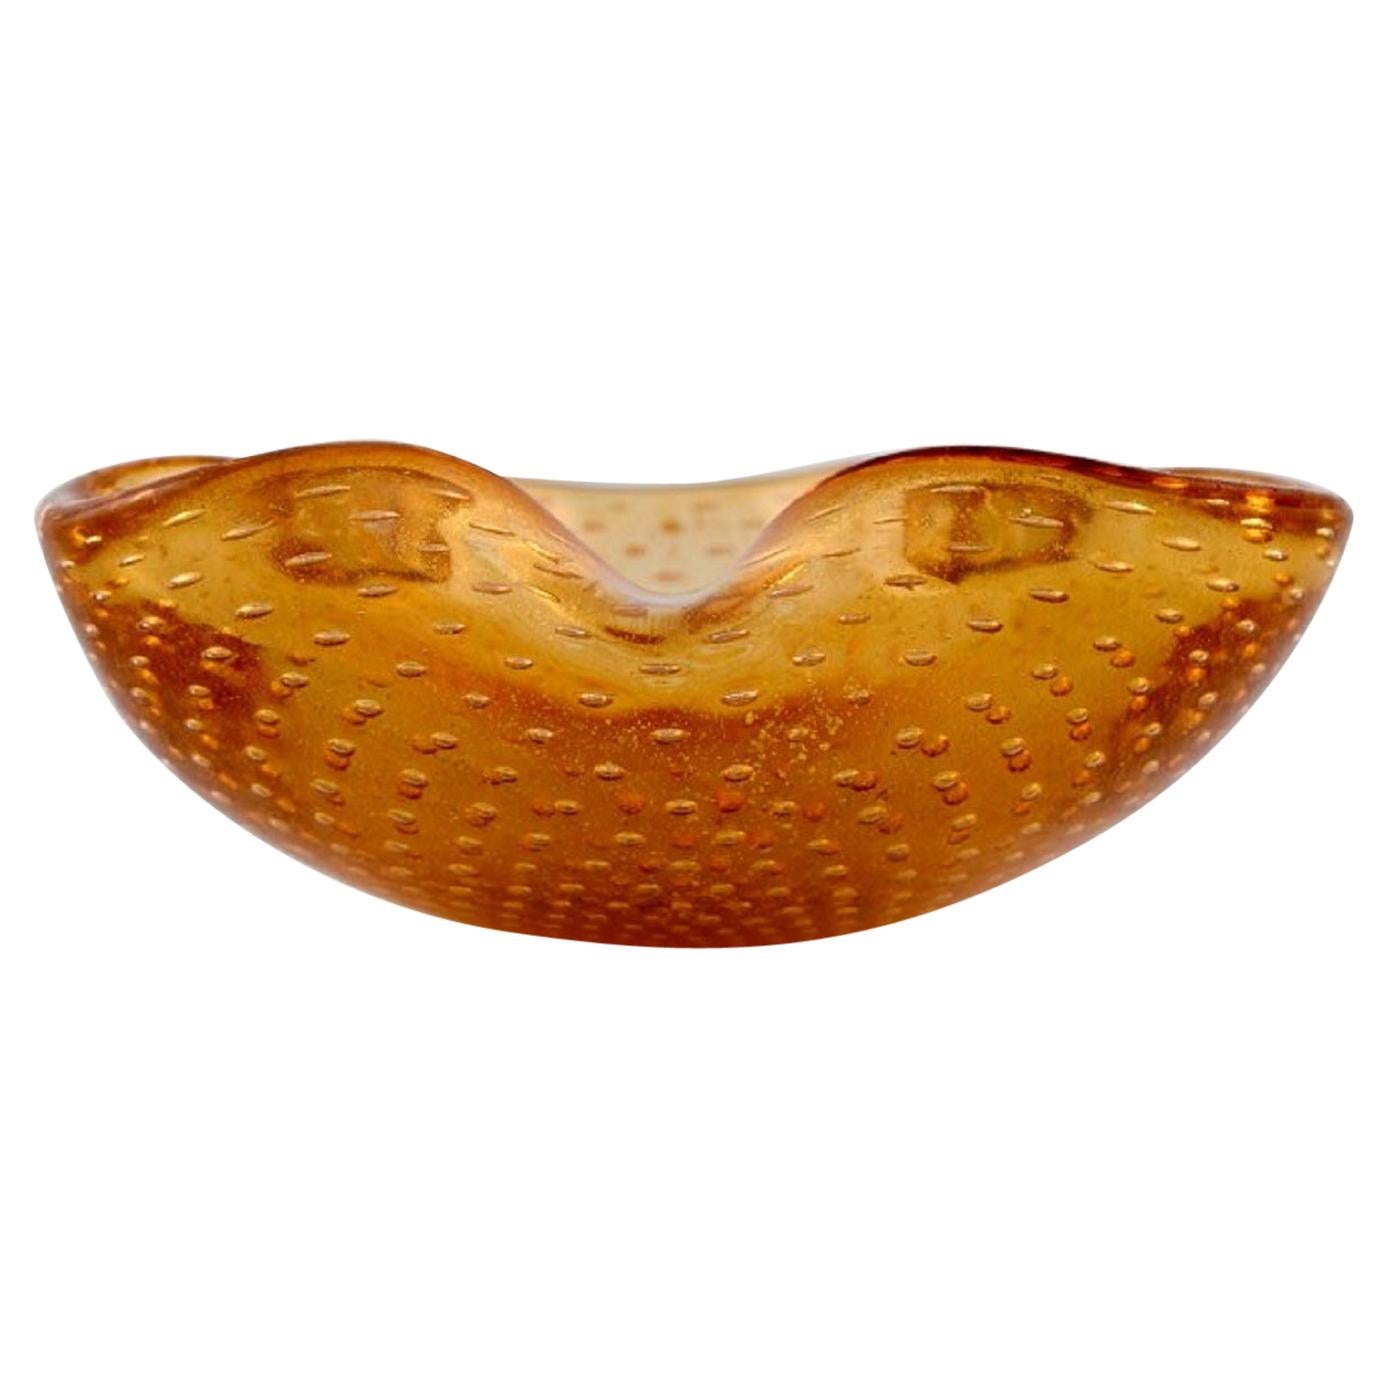 Murano Bowl in Amber Colored Mouth-Blown Art Glass with Inlaid Air Bubbles